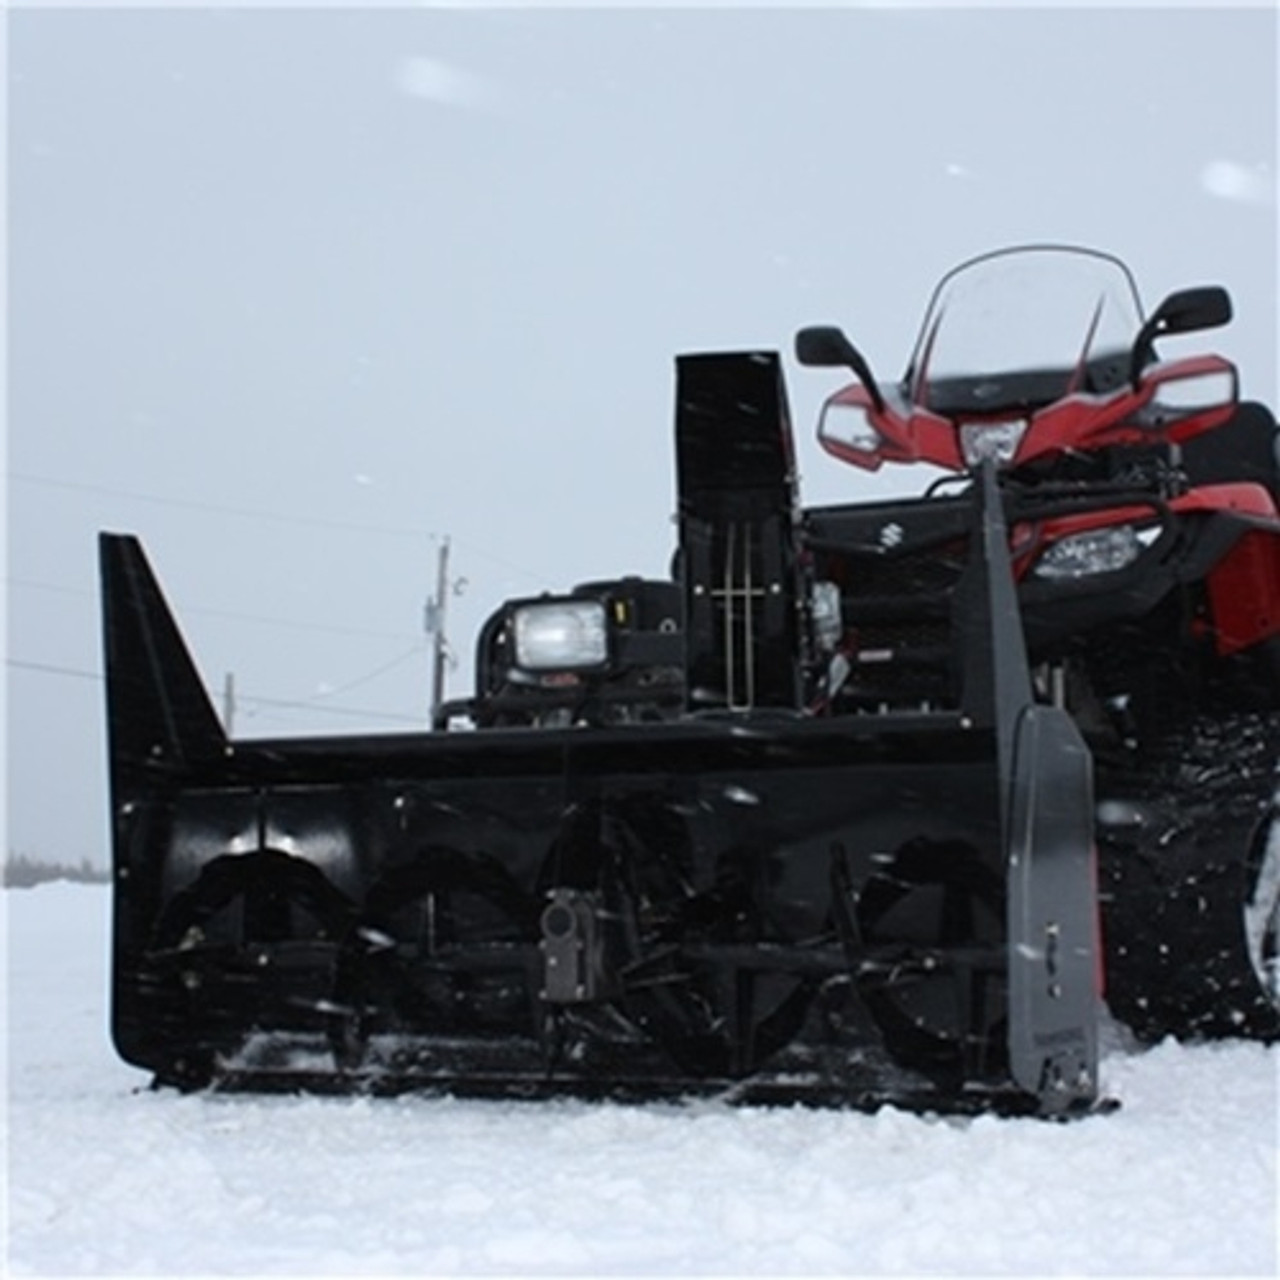 A front-facing image of an Arctic Cat Snowblower by Bercomac, installed on an ATV and parked on snowy terrain.